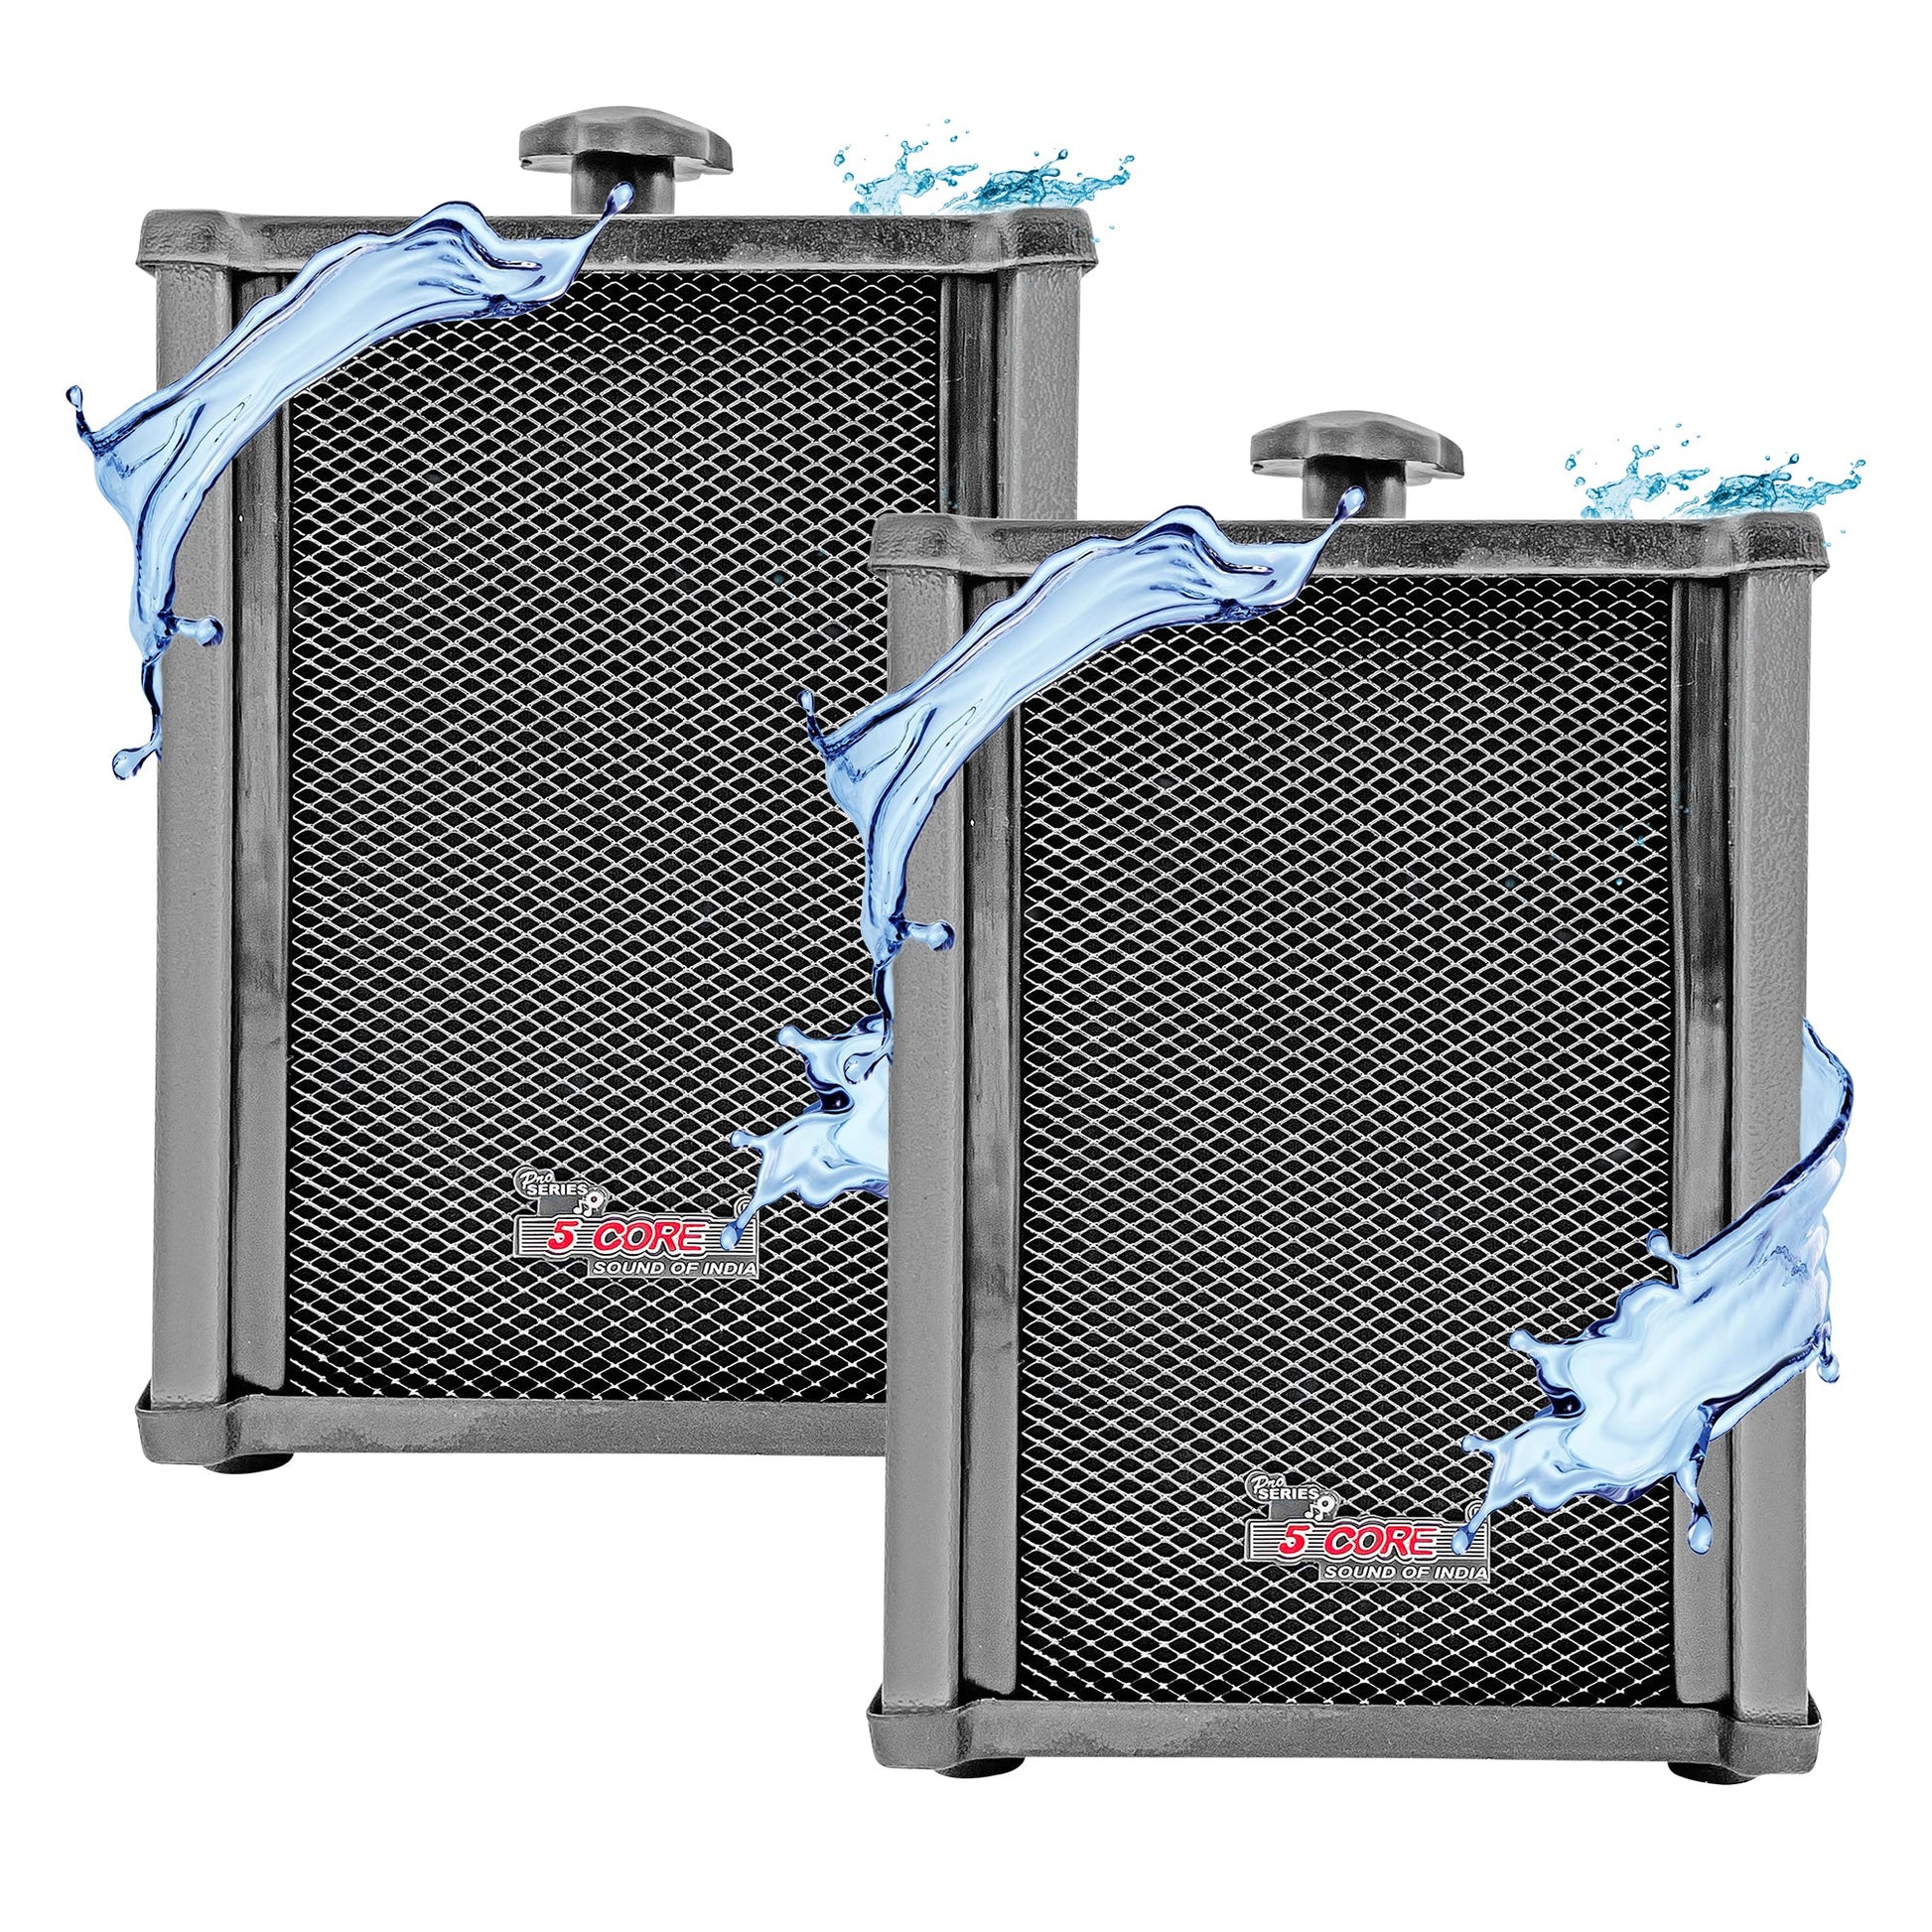 5 CORE 6x4 Inch In Wall Speaker Pair High Performance 10 Watt Outdoor Indoor Speaker with Effortless Mounting Swivel | All Weather Resistance | Stereo Sound for Home Theatre, Patio, Garden Grey 10T G 2PCS-0